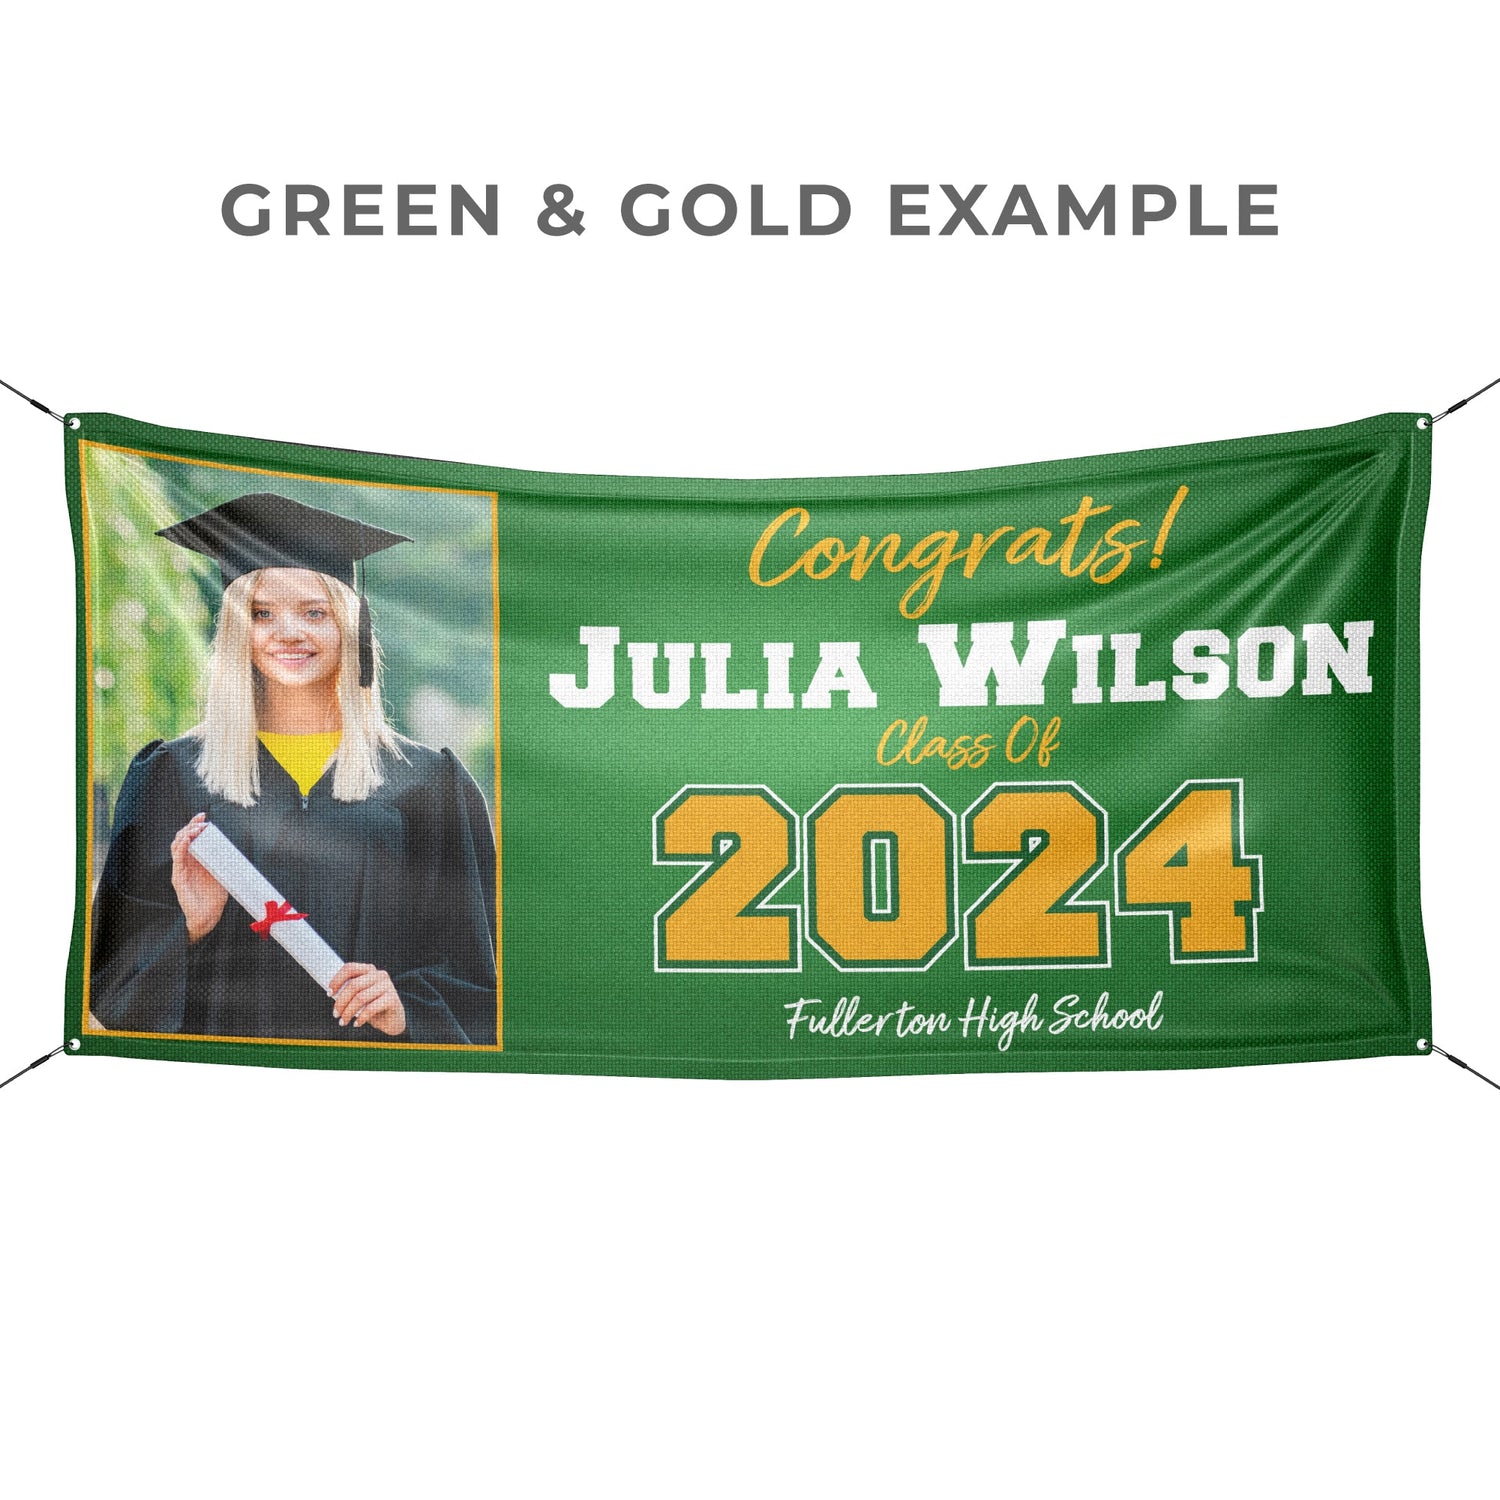 Grad Banners & Gifts - Personalized Congrats Graduation Banner With Image